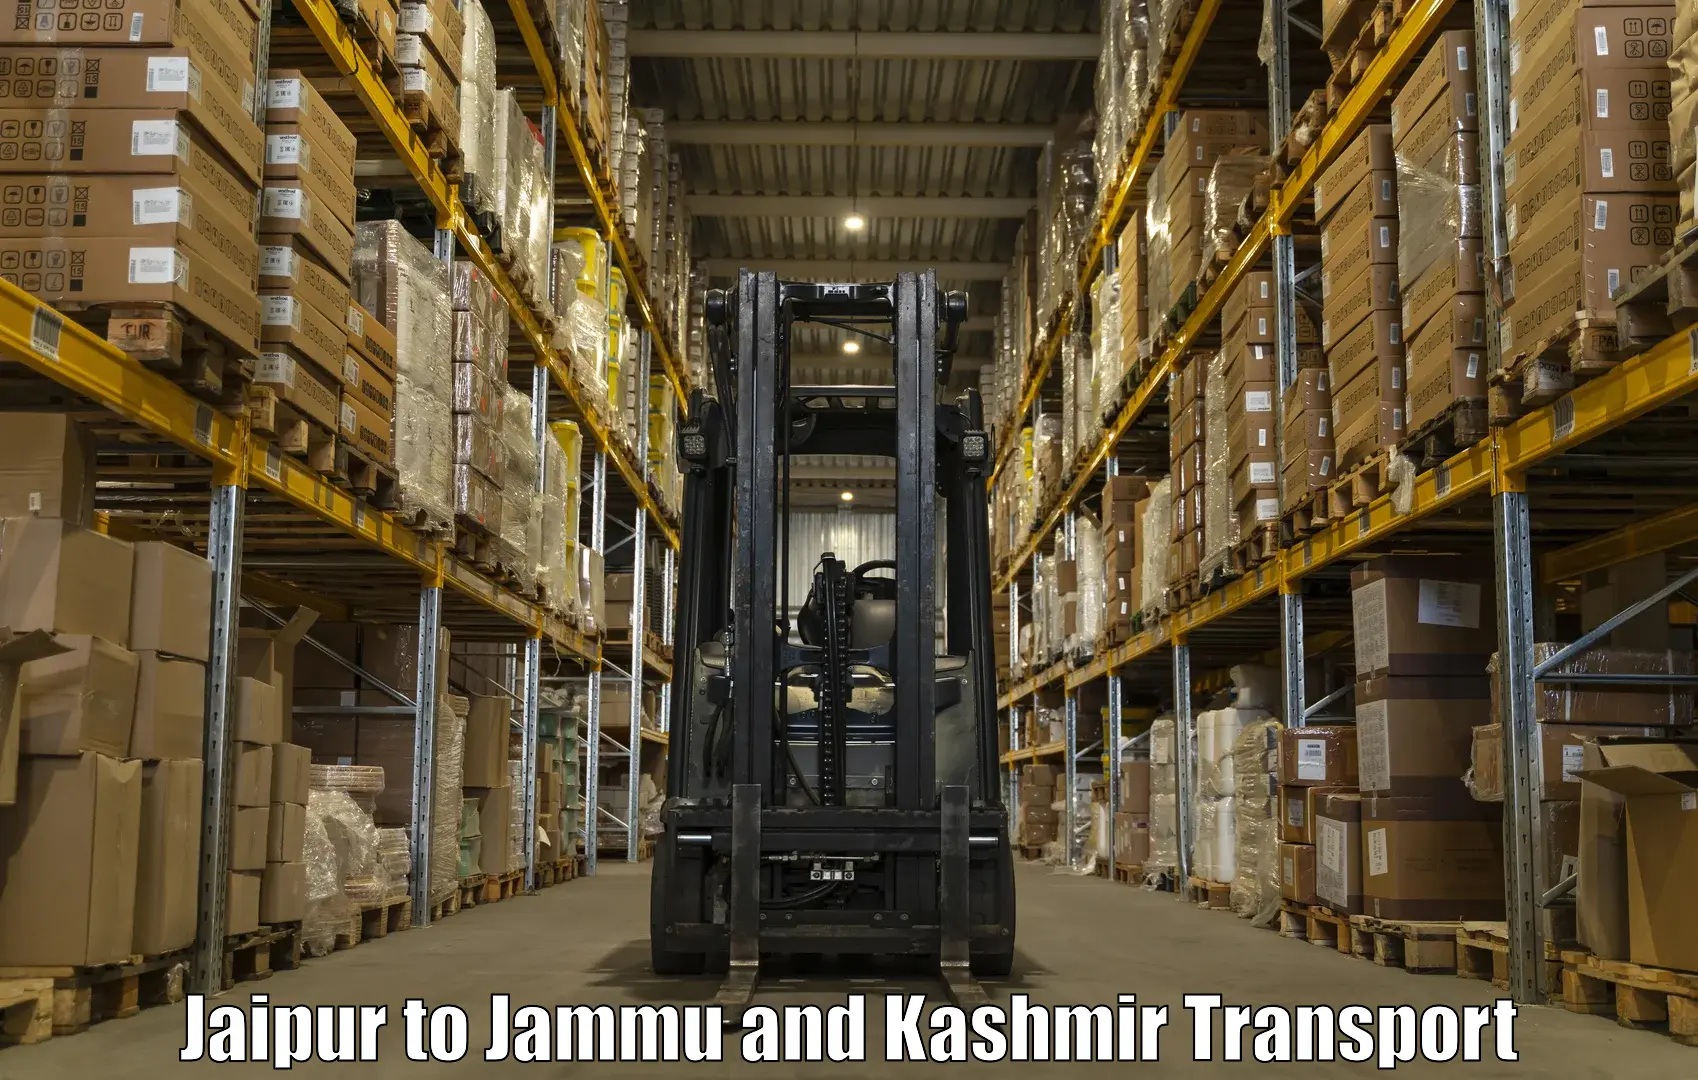 Goods delivery service Jaipur to Rajouri